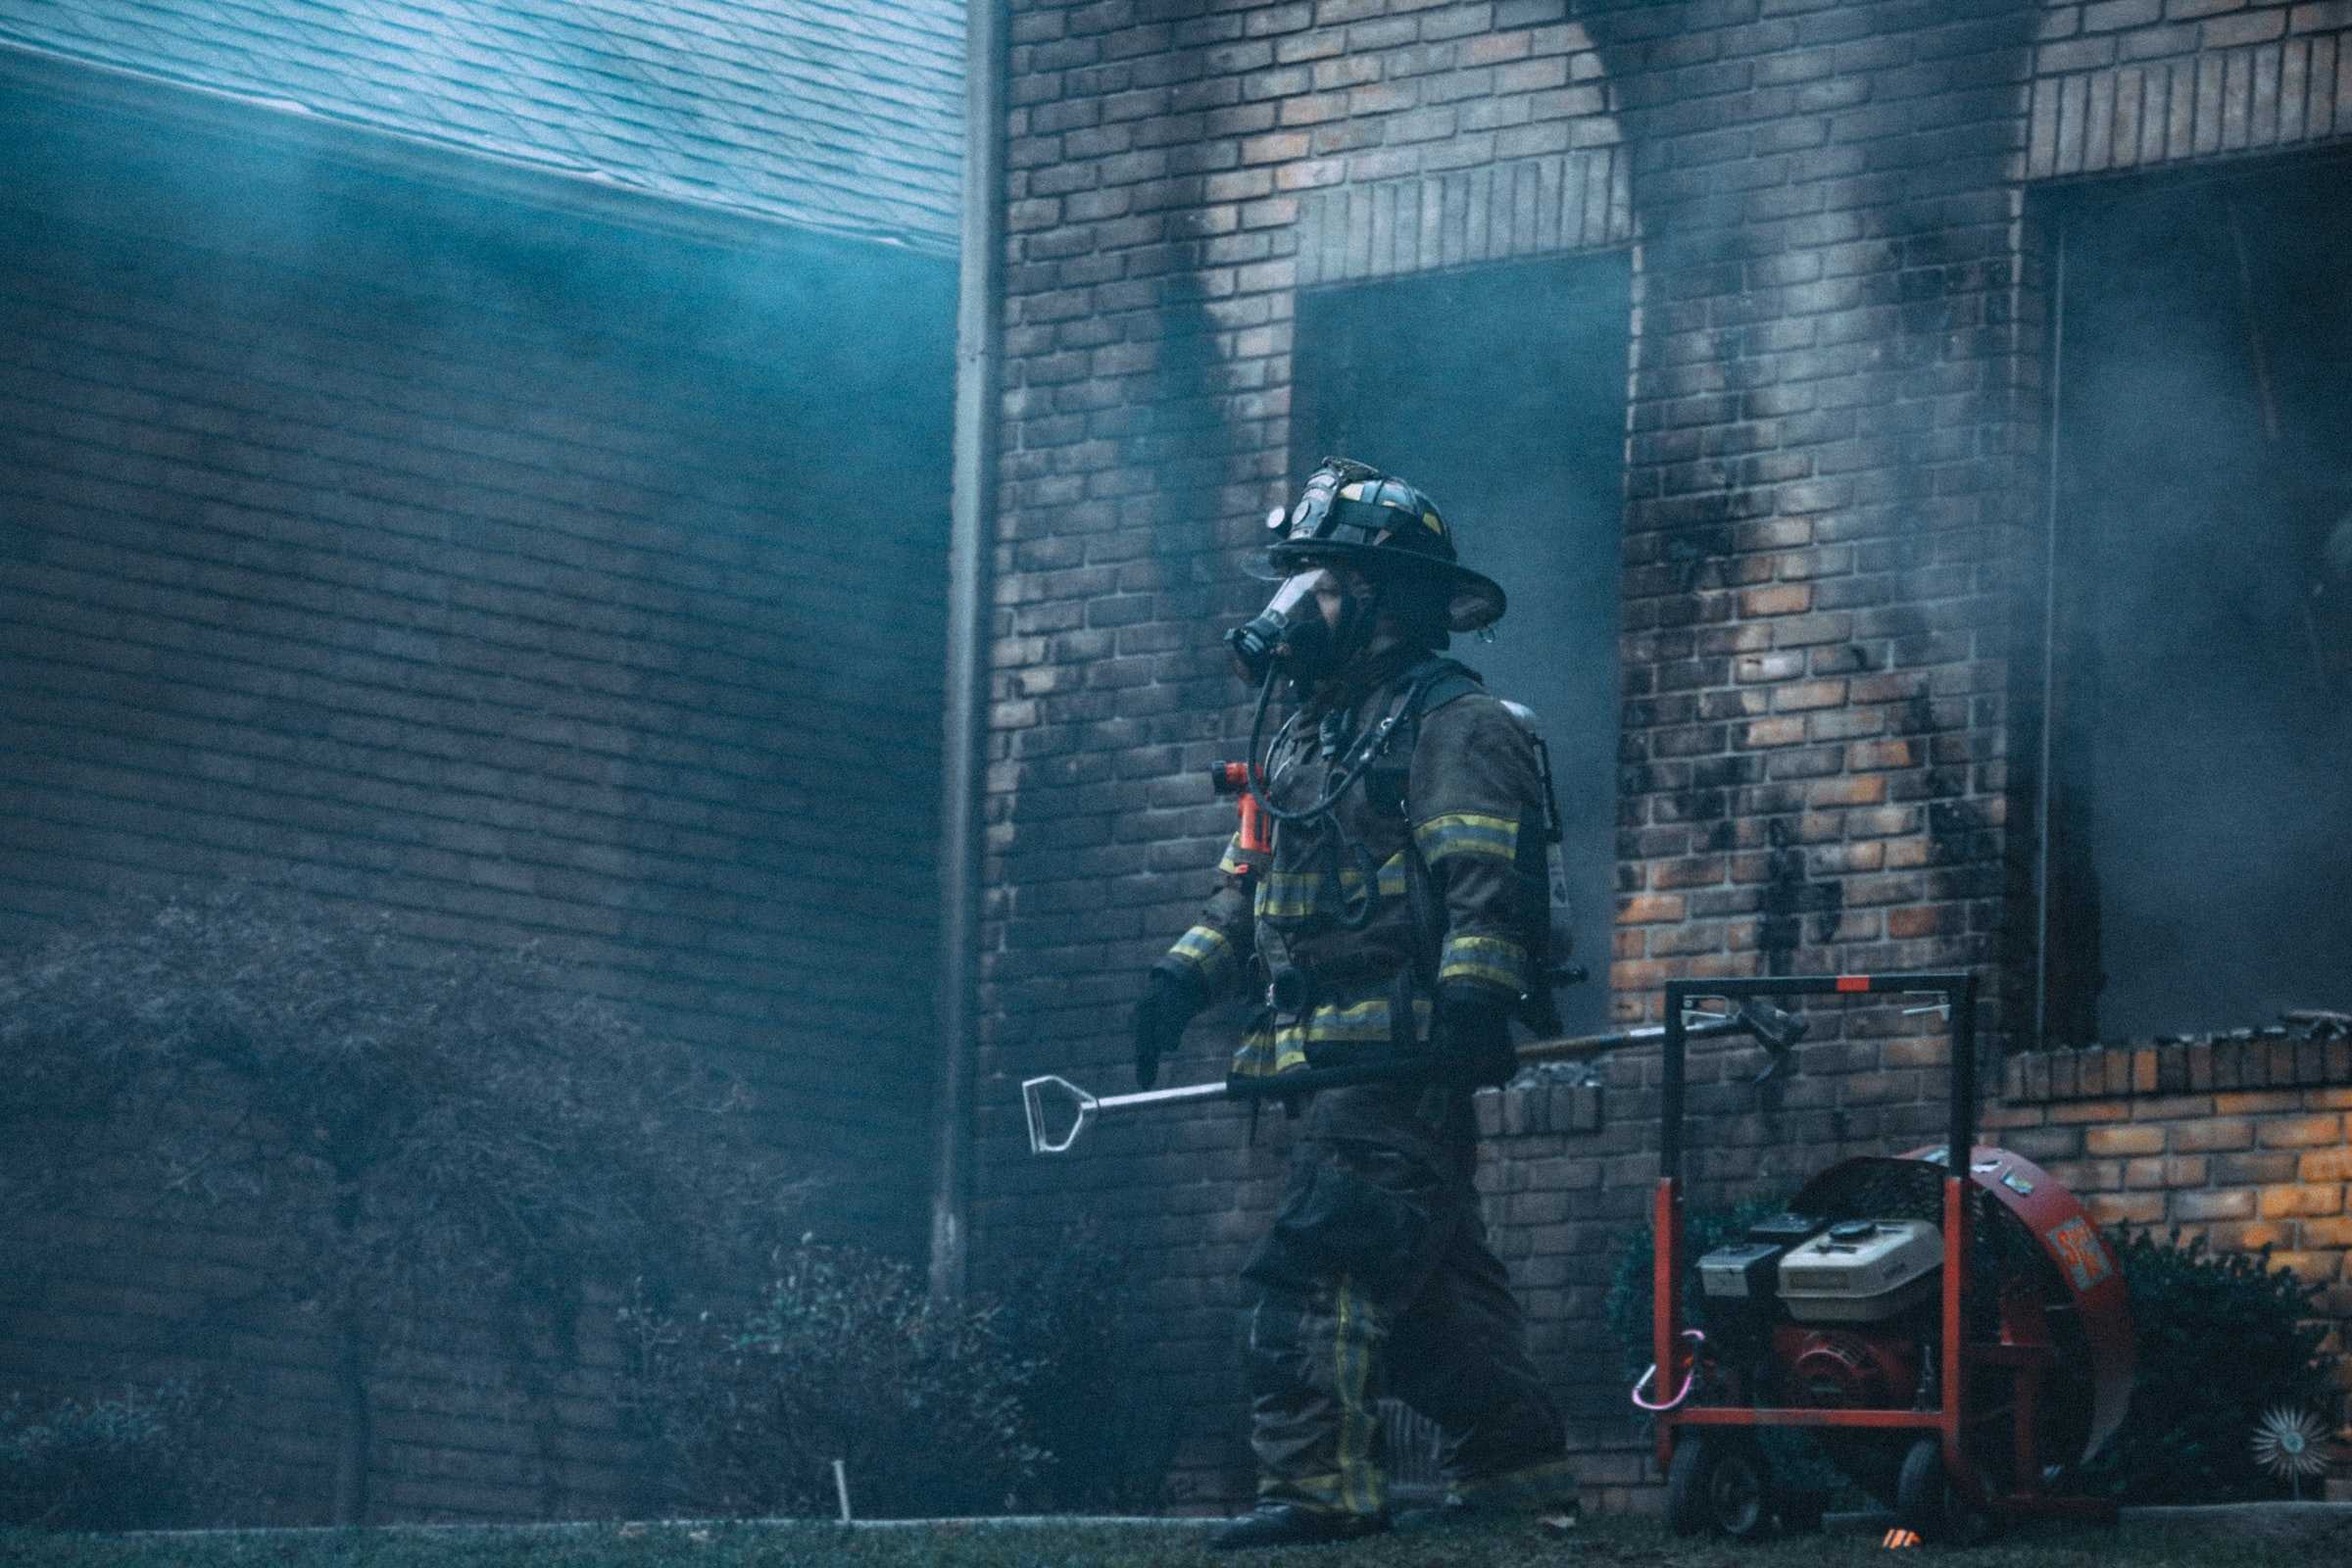 Firefighter walking out of a burning building